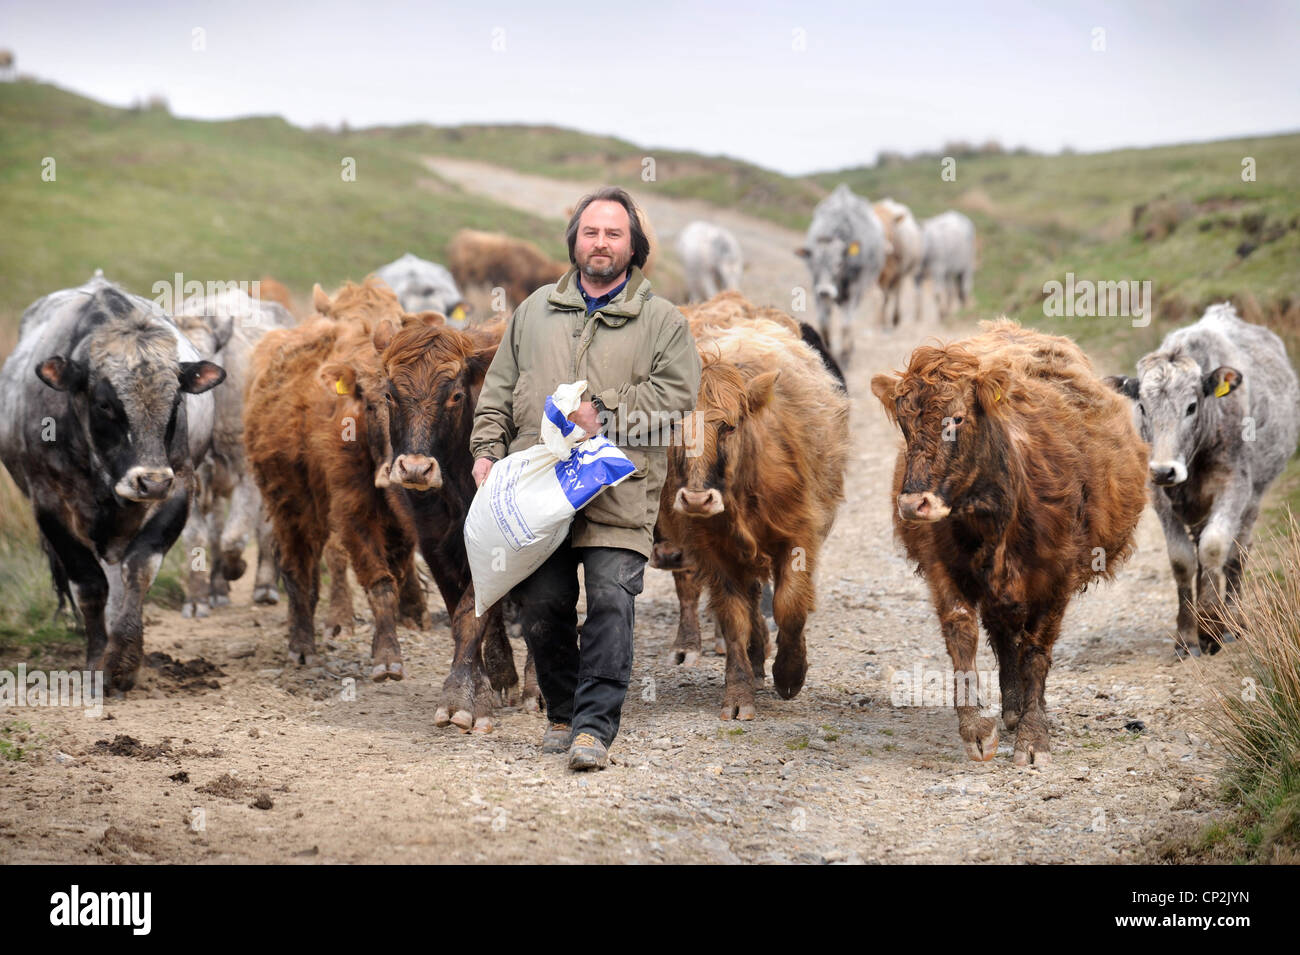 A cattle farmer carrying a feed bag is followed by his stock Wales, UK Stock Photo